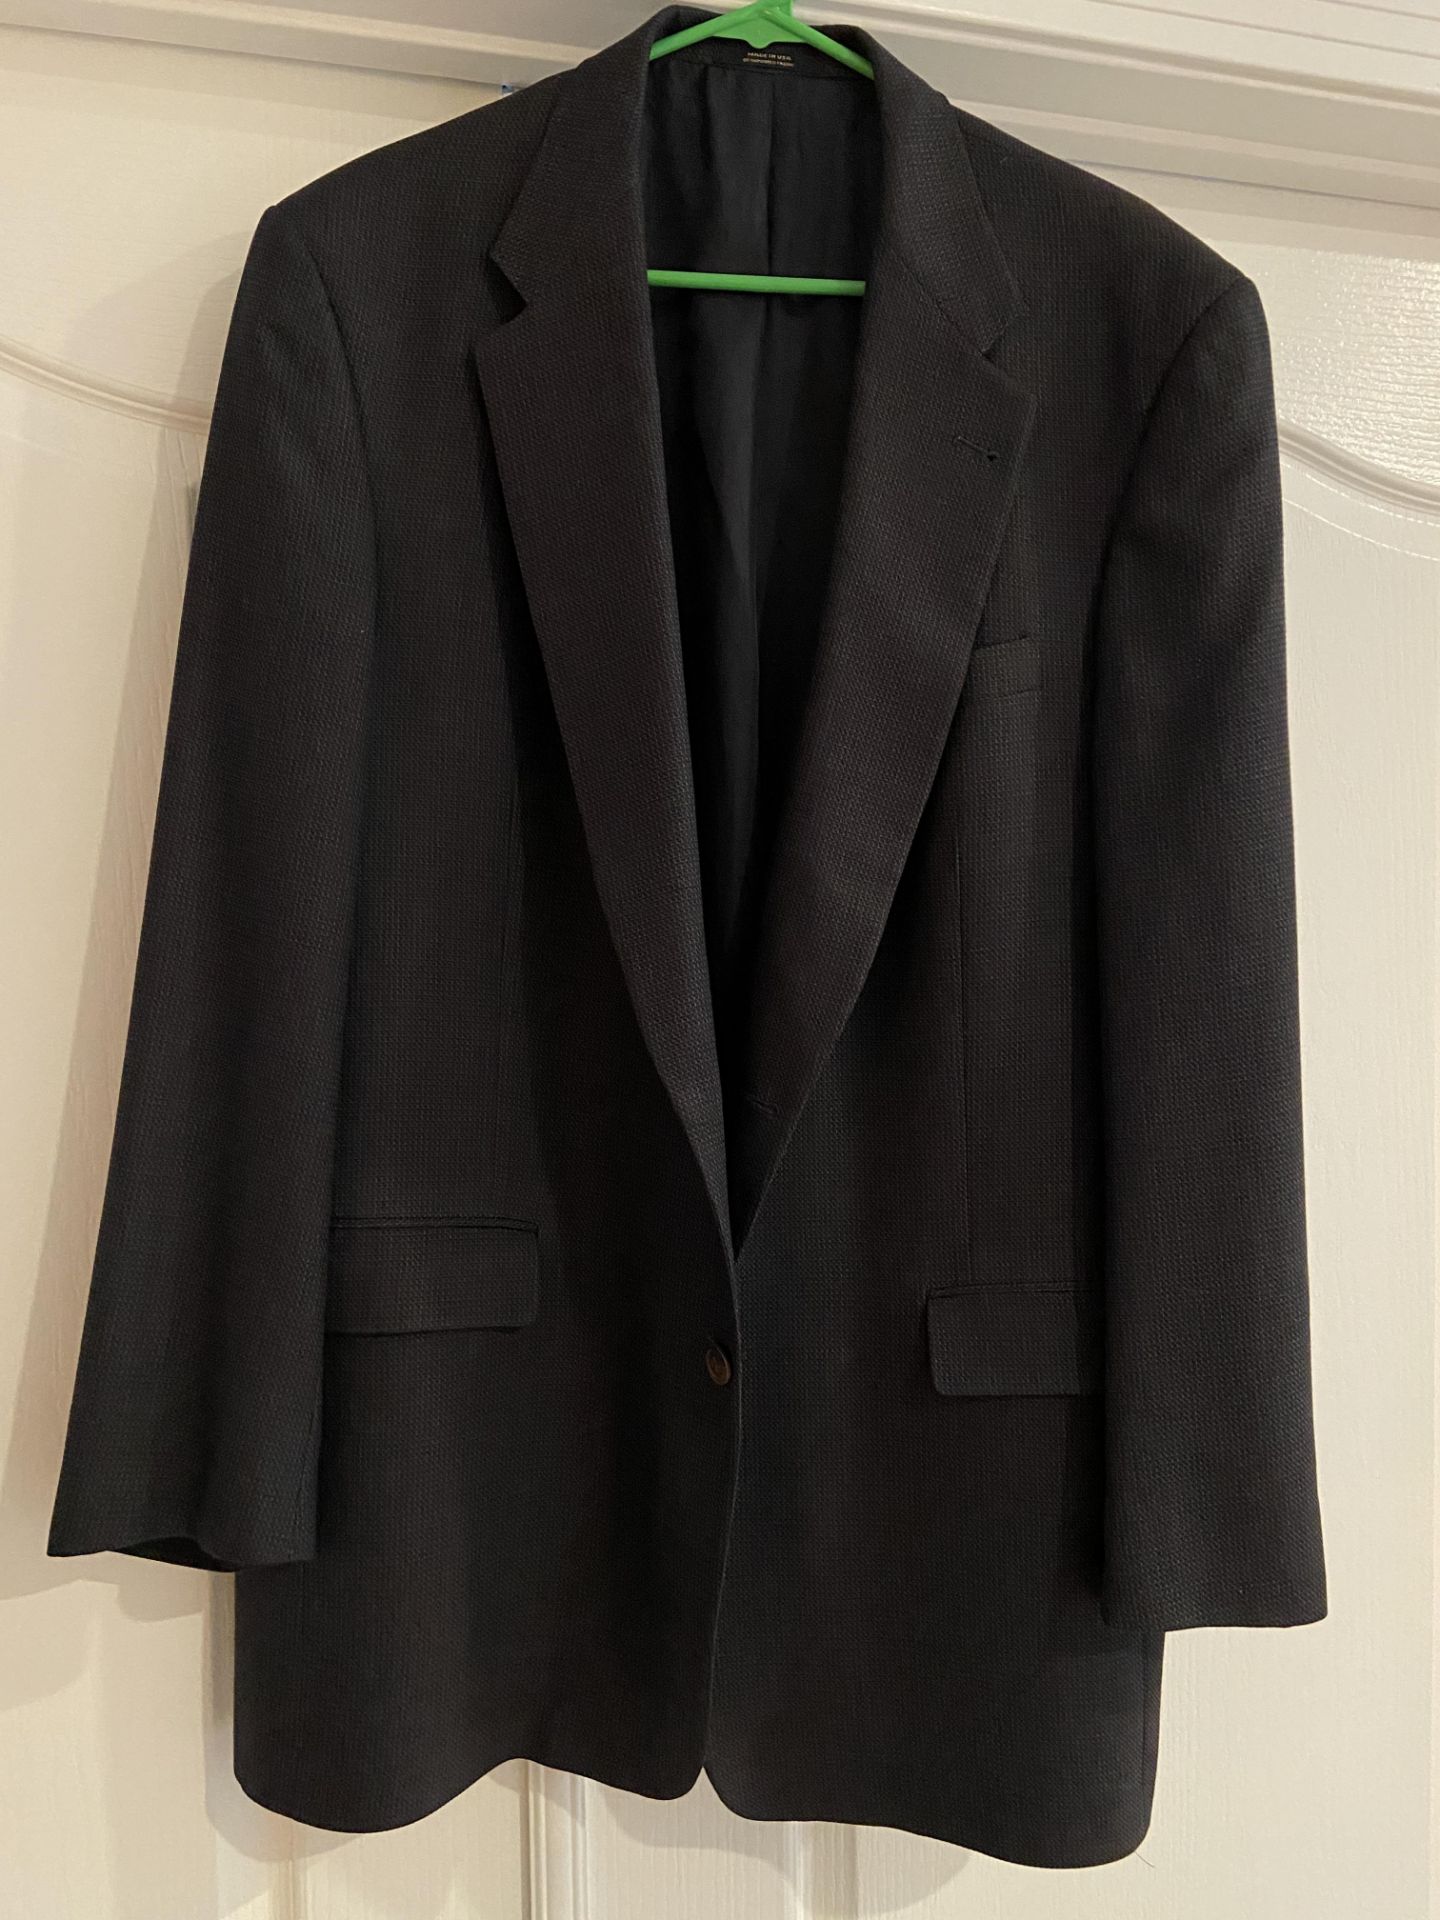 Collection of High End Men's Clothing: 6 Suits Size 42R, 1 Sport Jacket Size 42R, 1 Polo XL - Image 6 of 18